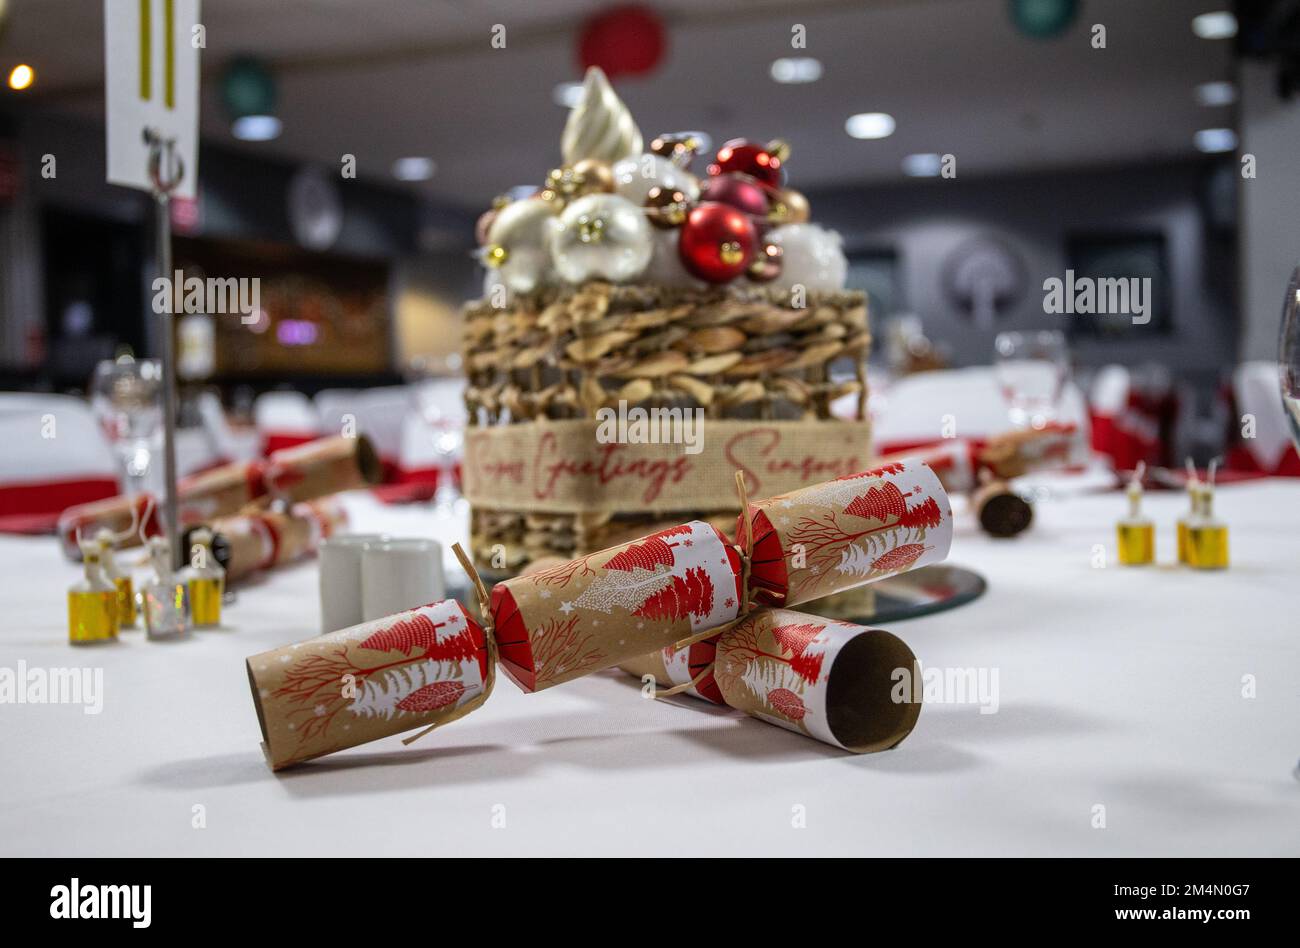 Crackers on decorated table in function room set up for Christmas party event during festive season in UK Stock Photo